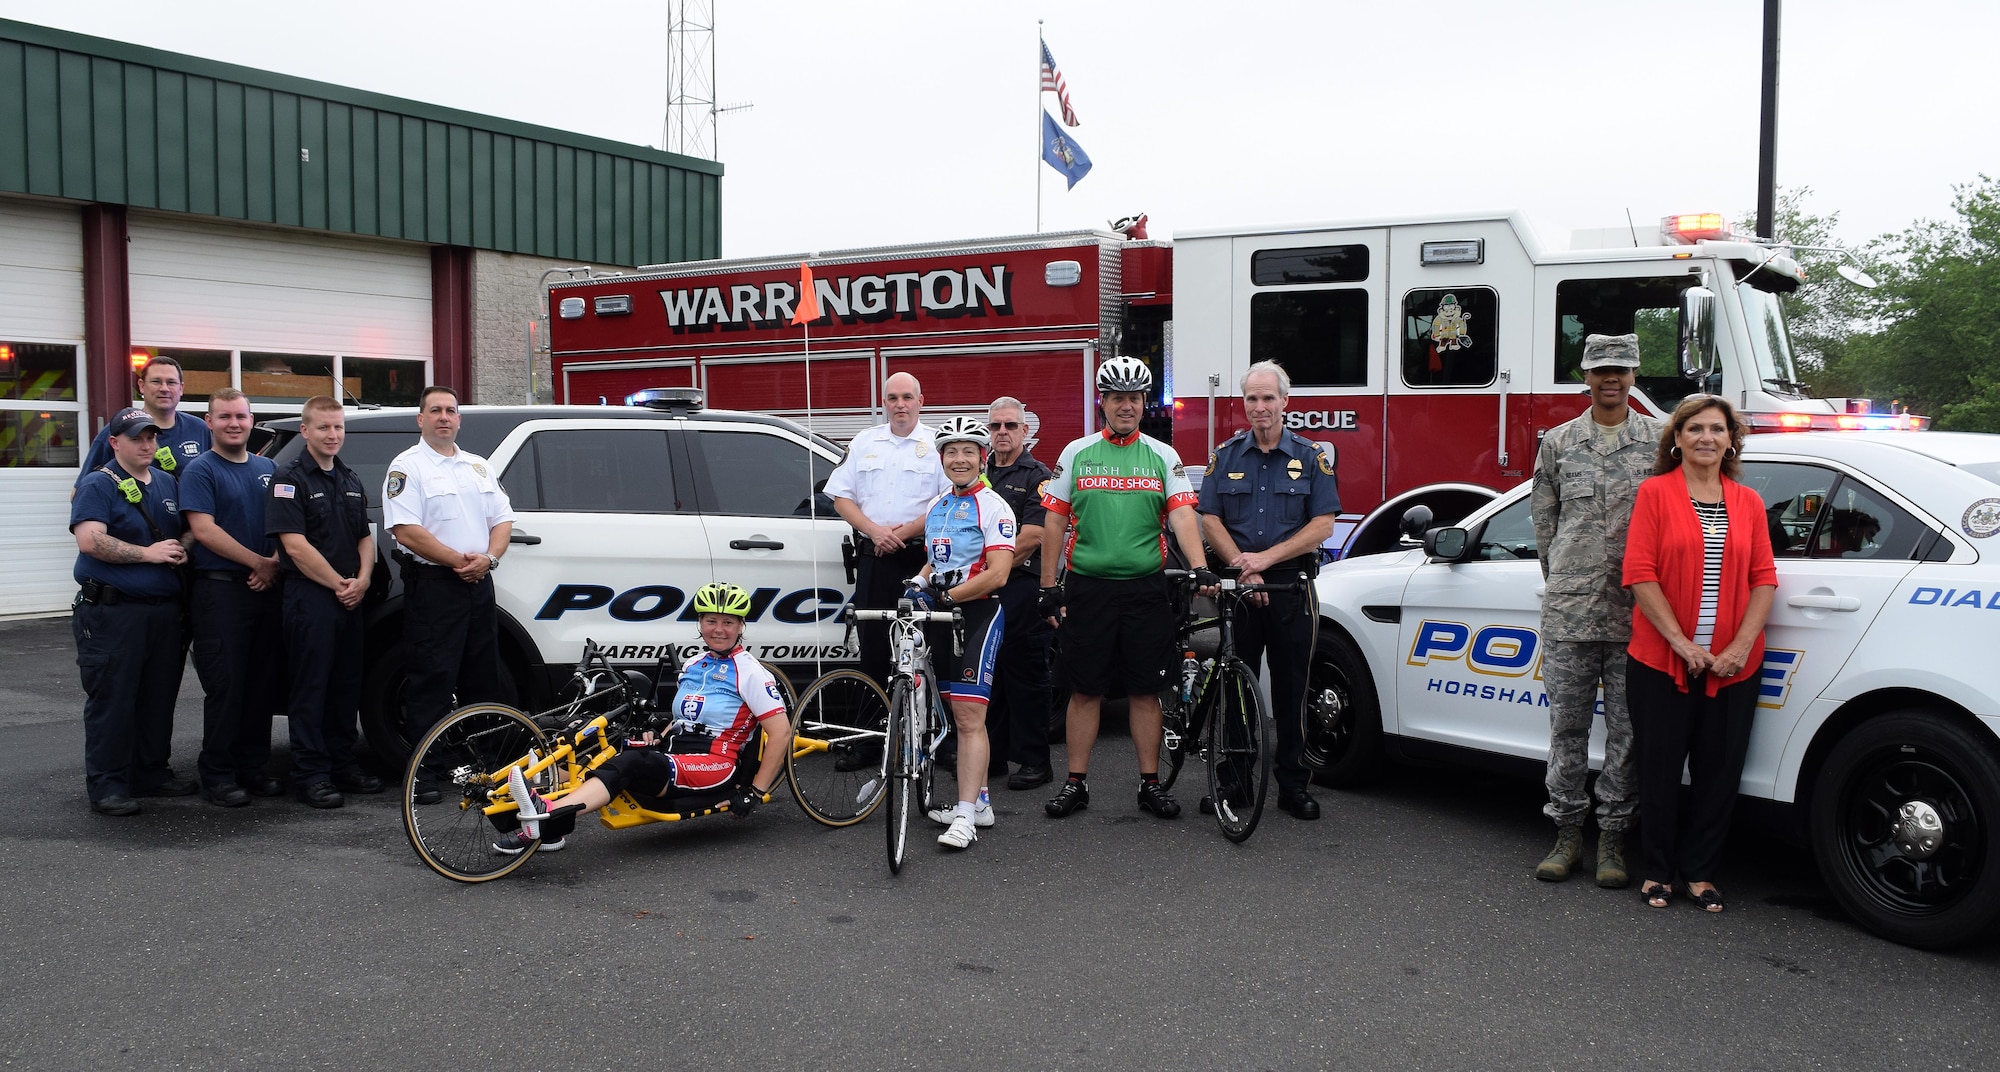 First responders from Warrington and Horsham, Pa. greet members of the Horsham Air Guard Station Project HERO team and Horsham, Pennsylvania’s chief of police at the Warrington Township Fire Company Number 1 along Easton Road, Warrington Pa. July 14, 2016. The station stopover, was the midpoint of a 15 mile trial run of a planned cycling route for upcoming larger events.  (U.S. Air National Guard photo by Master Sgt. Christopher Botzum)